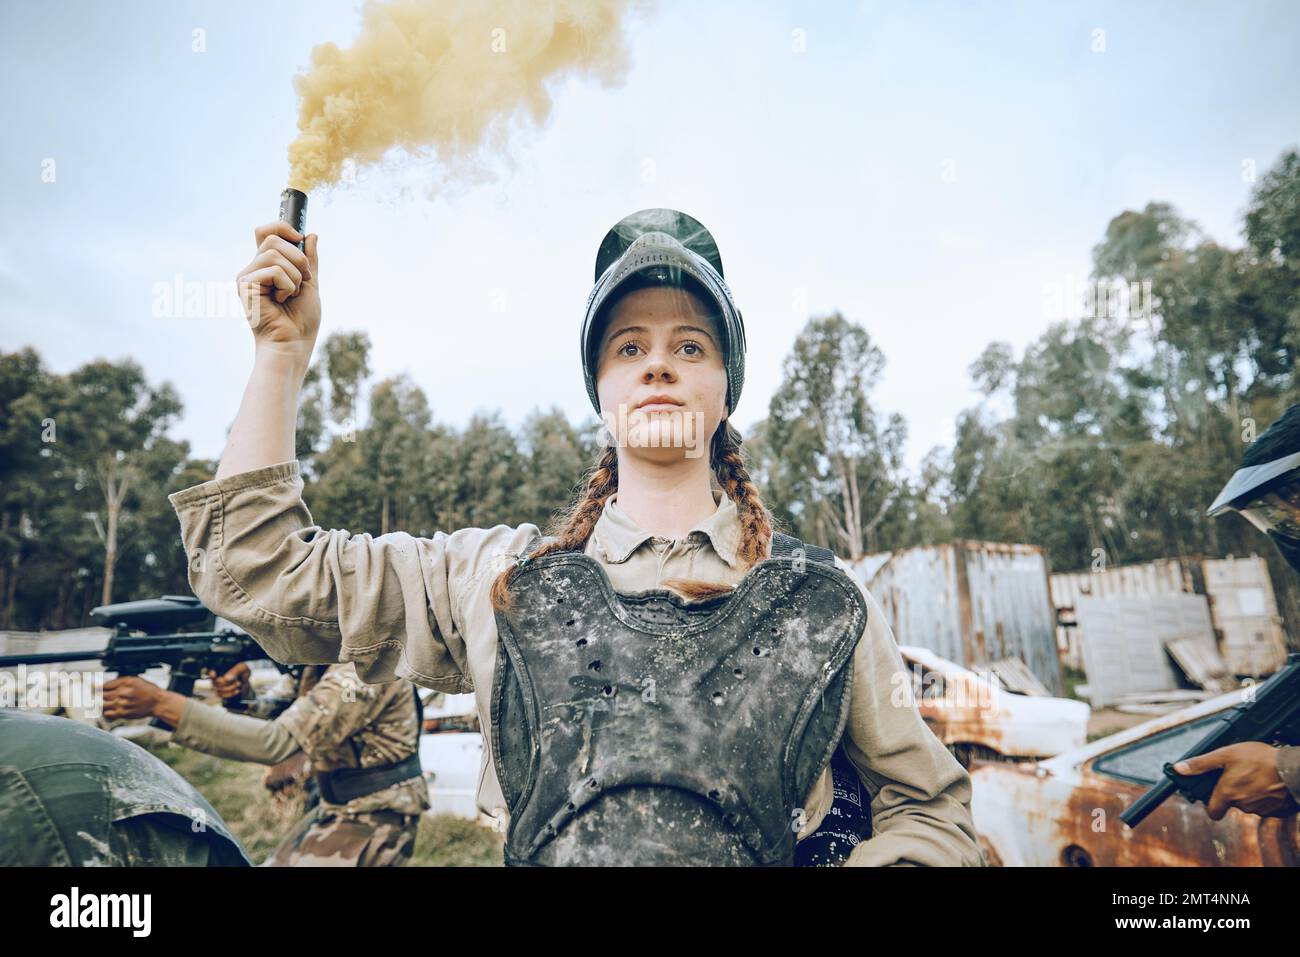 Nature, battle and girl with smoke during paintball, military training and army game in Spain. War, alert and woman playing with gear and equipment Stock Photo